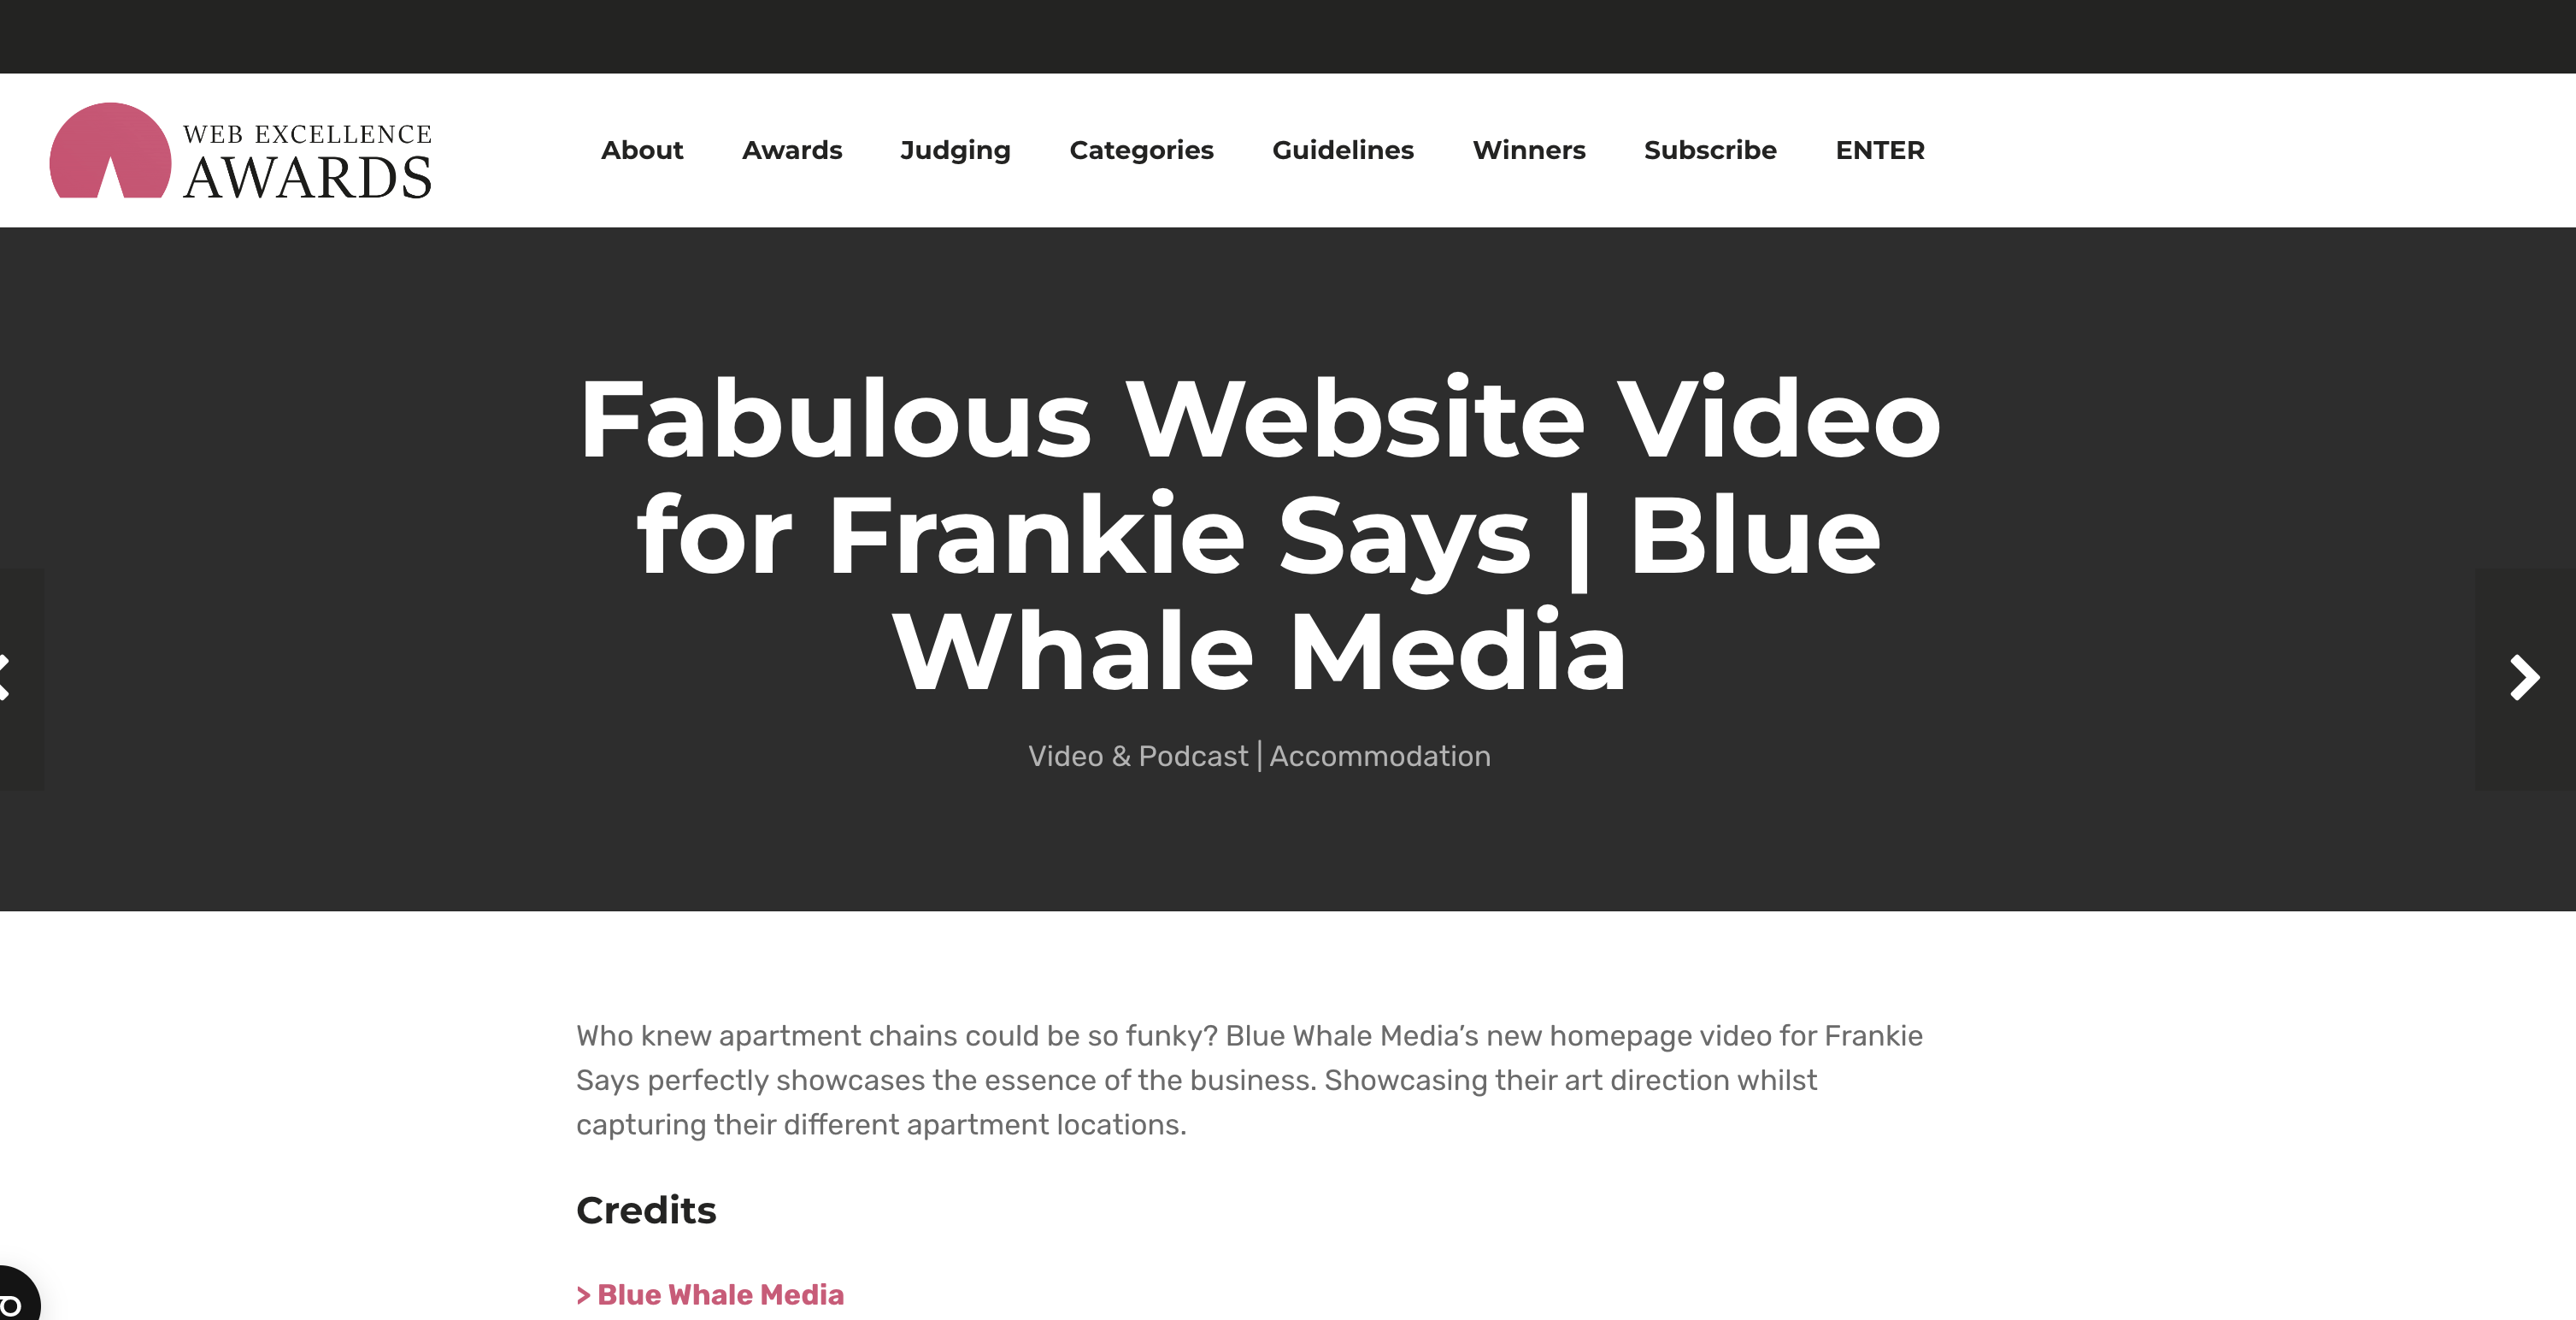 Fabulous Website Video for Frankie Says